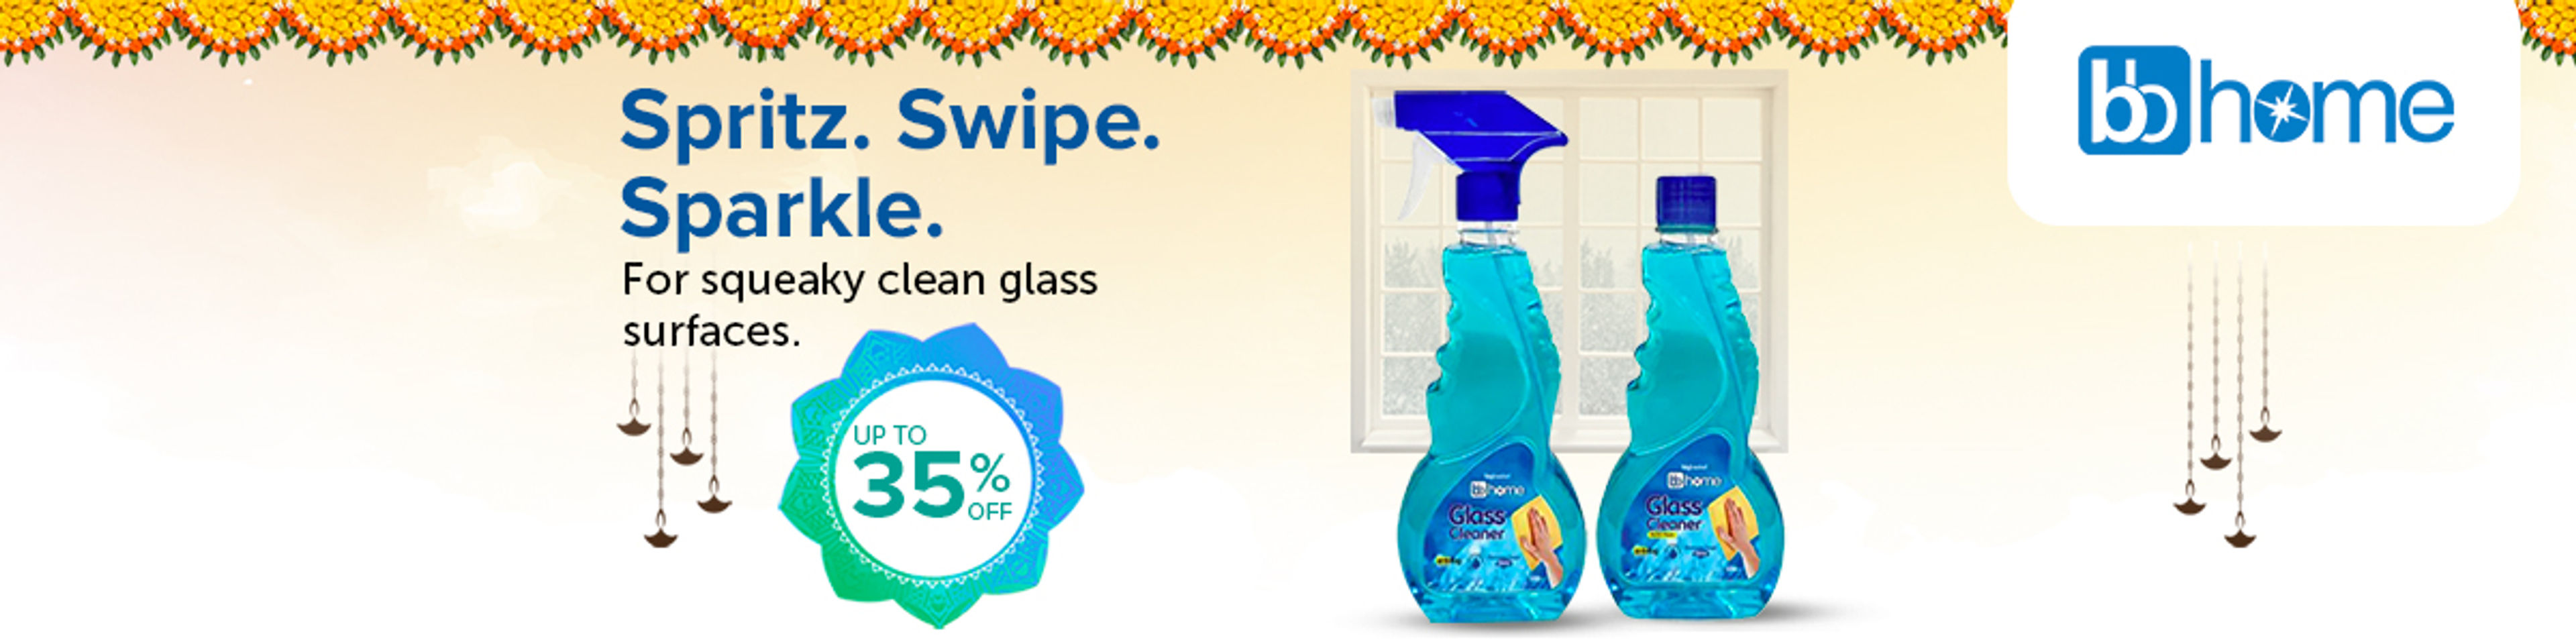 uploads/banner_images/ZXPL4541-l1-byc-c-bbhome-glass-cleaner-1200x300-25-oct-23.jpg